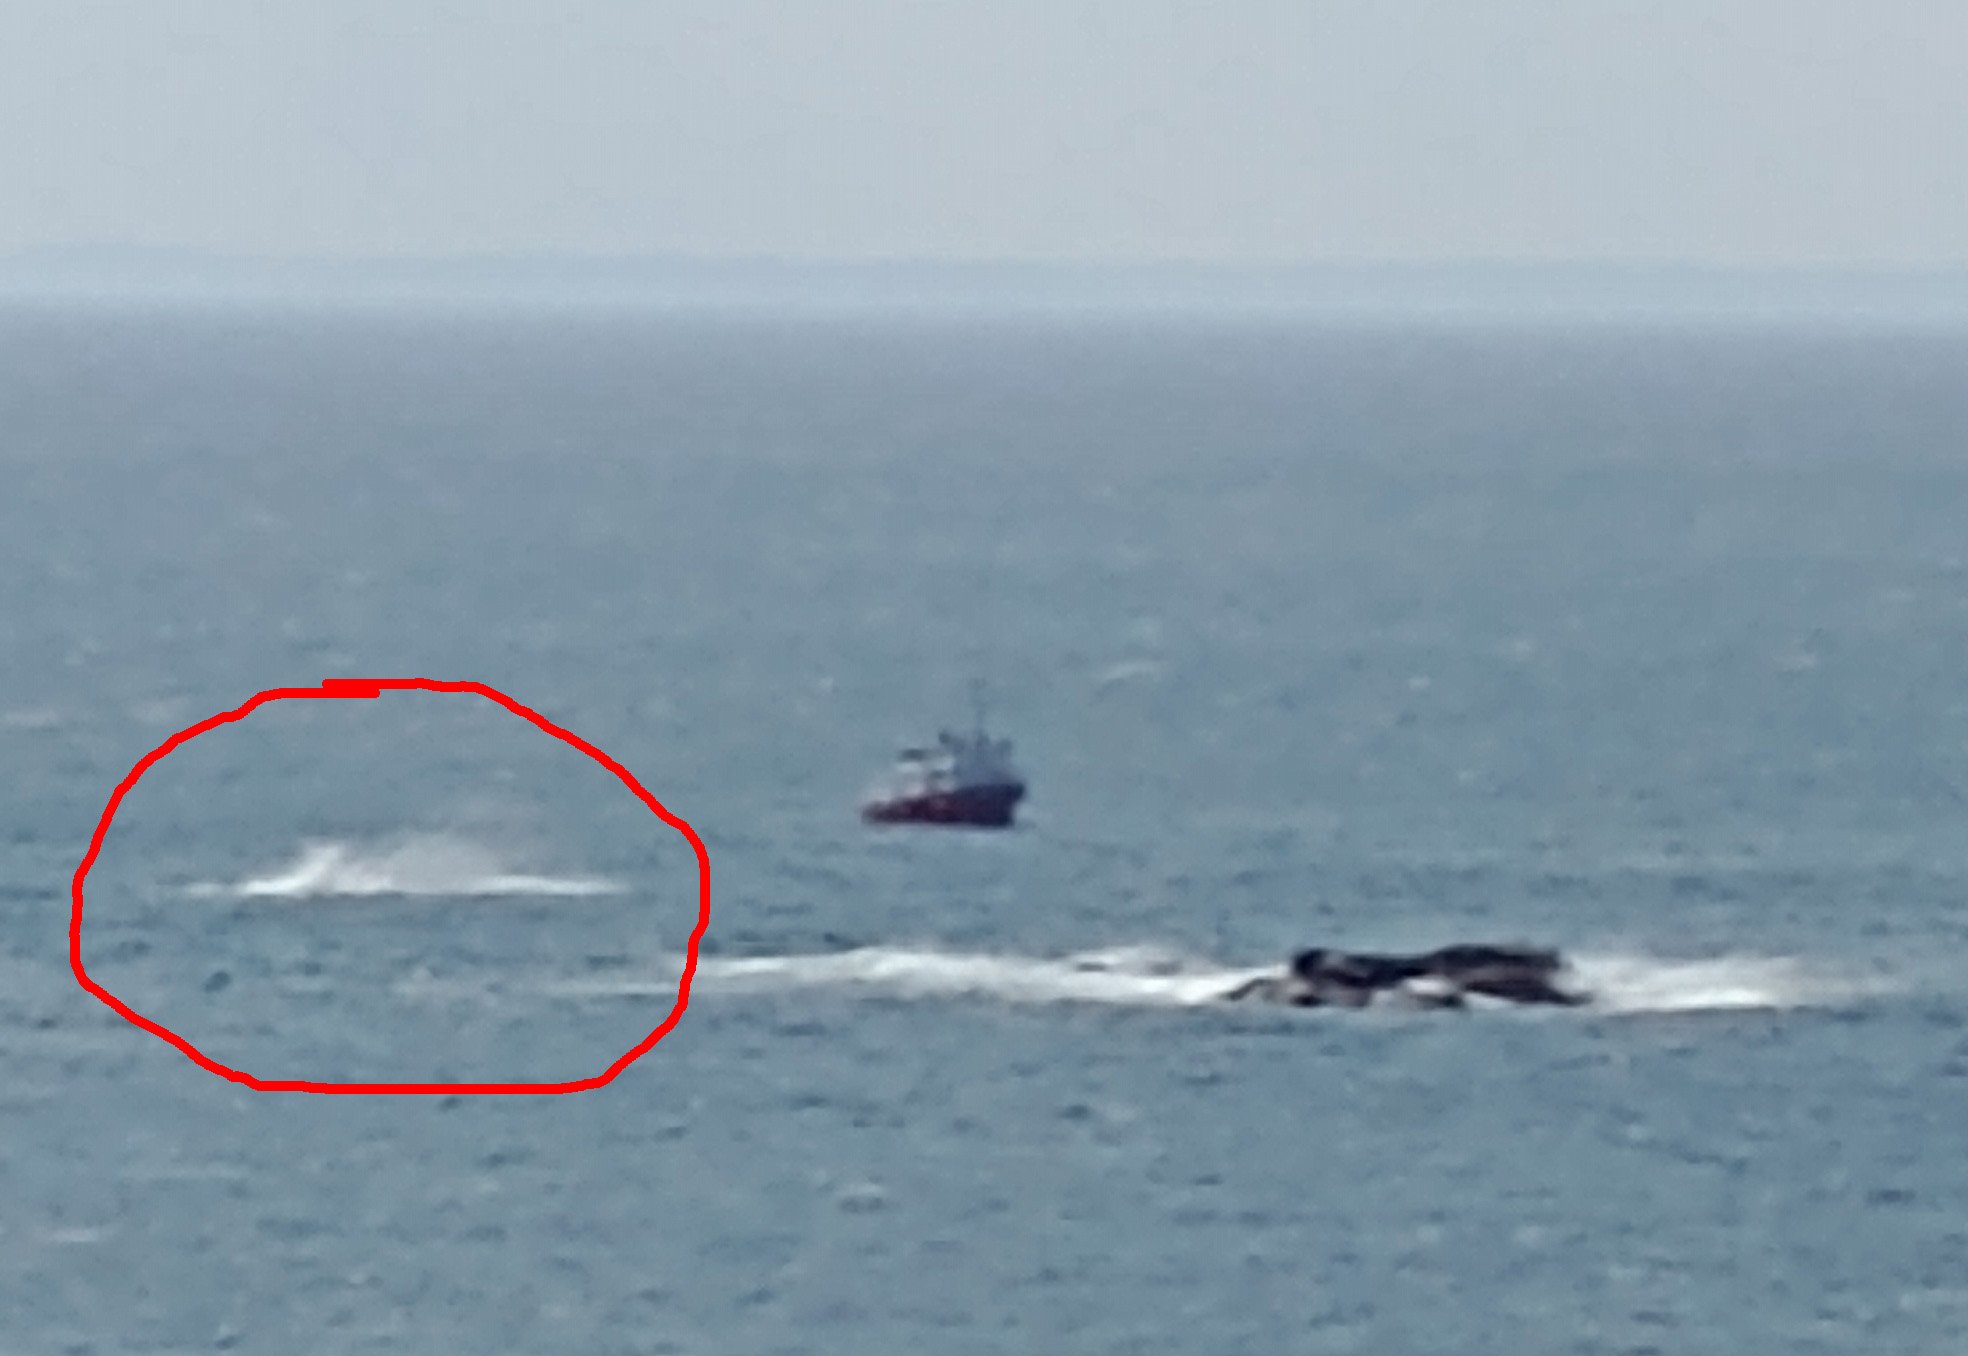 That boat is super close to the whales, must be an awesome excursion if you get lucky.